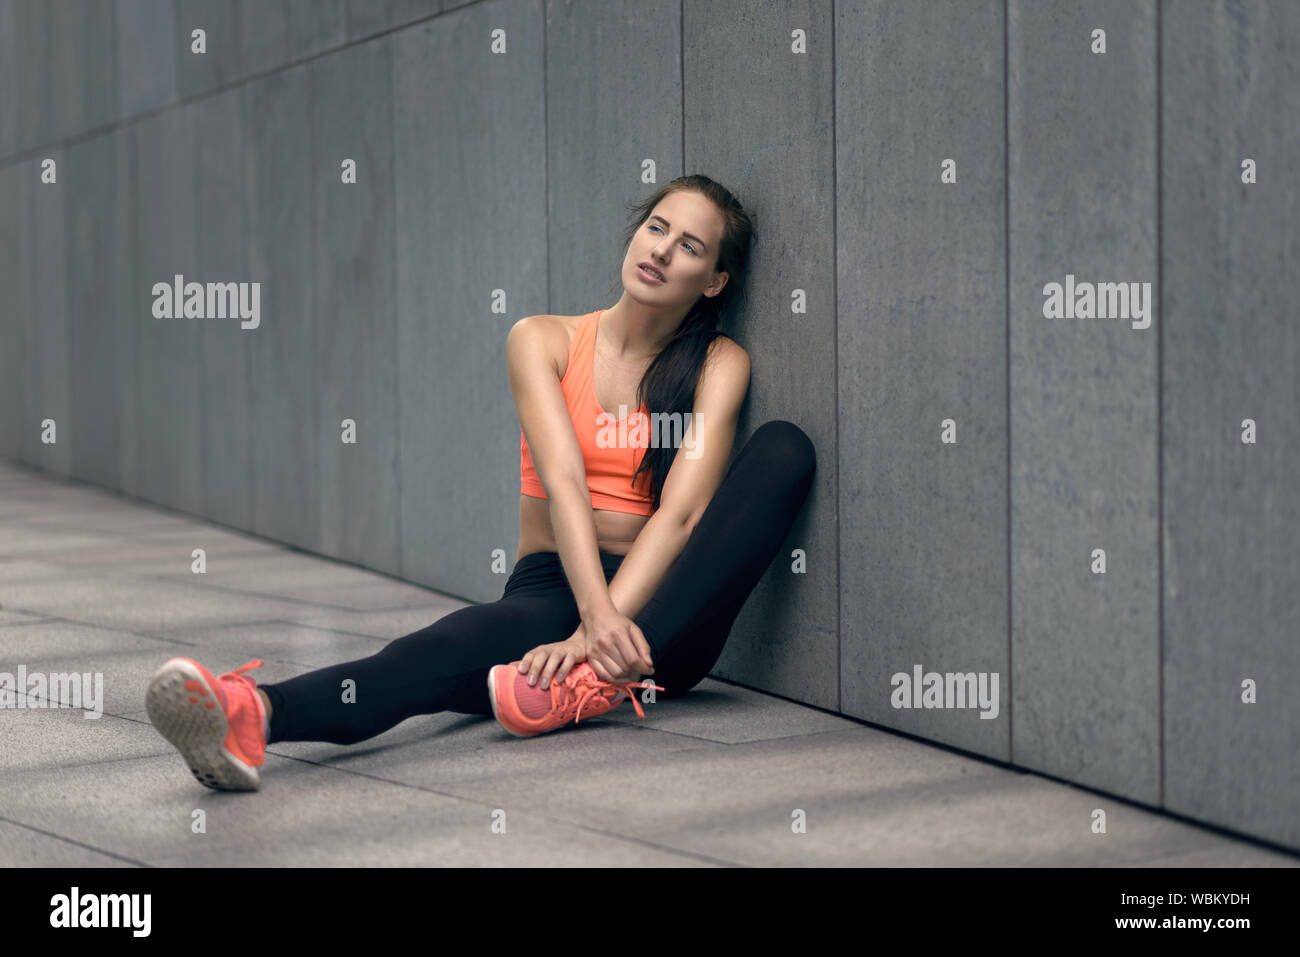 Woman In Sports Clothing Sitting Outdoors Stock Photo